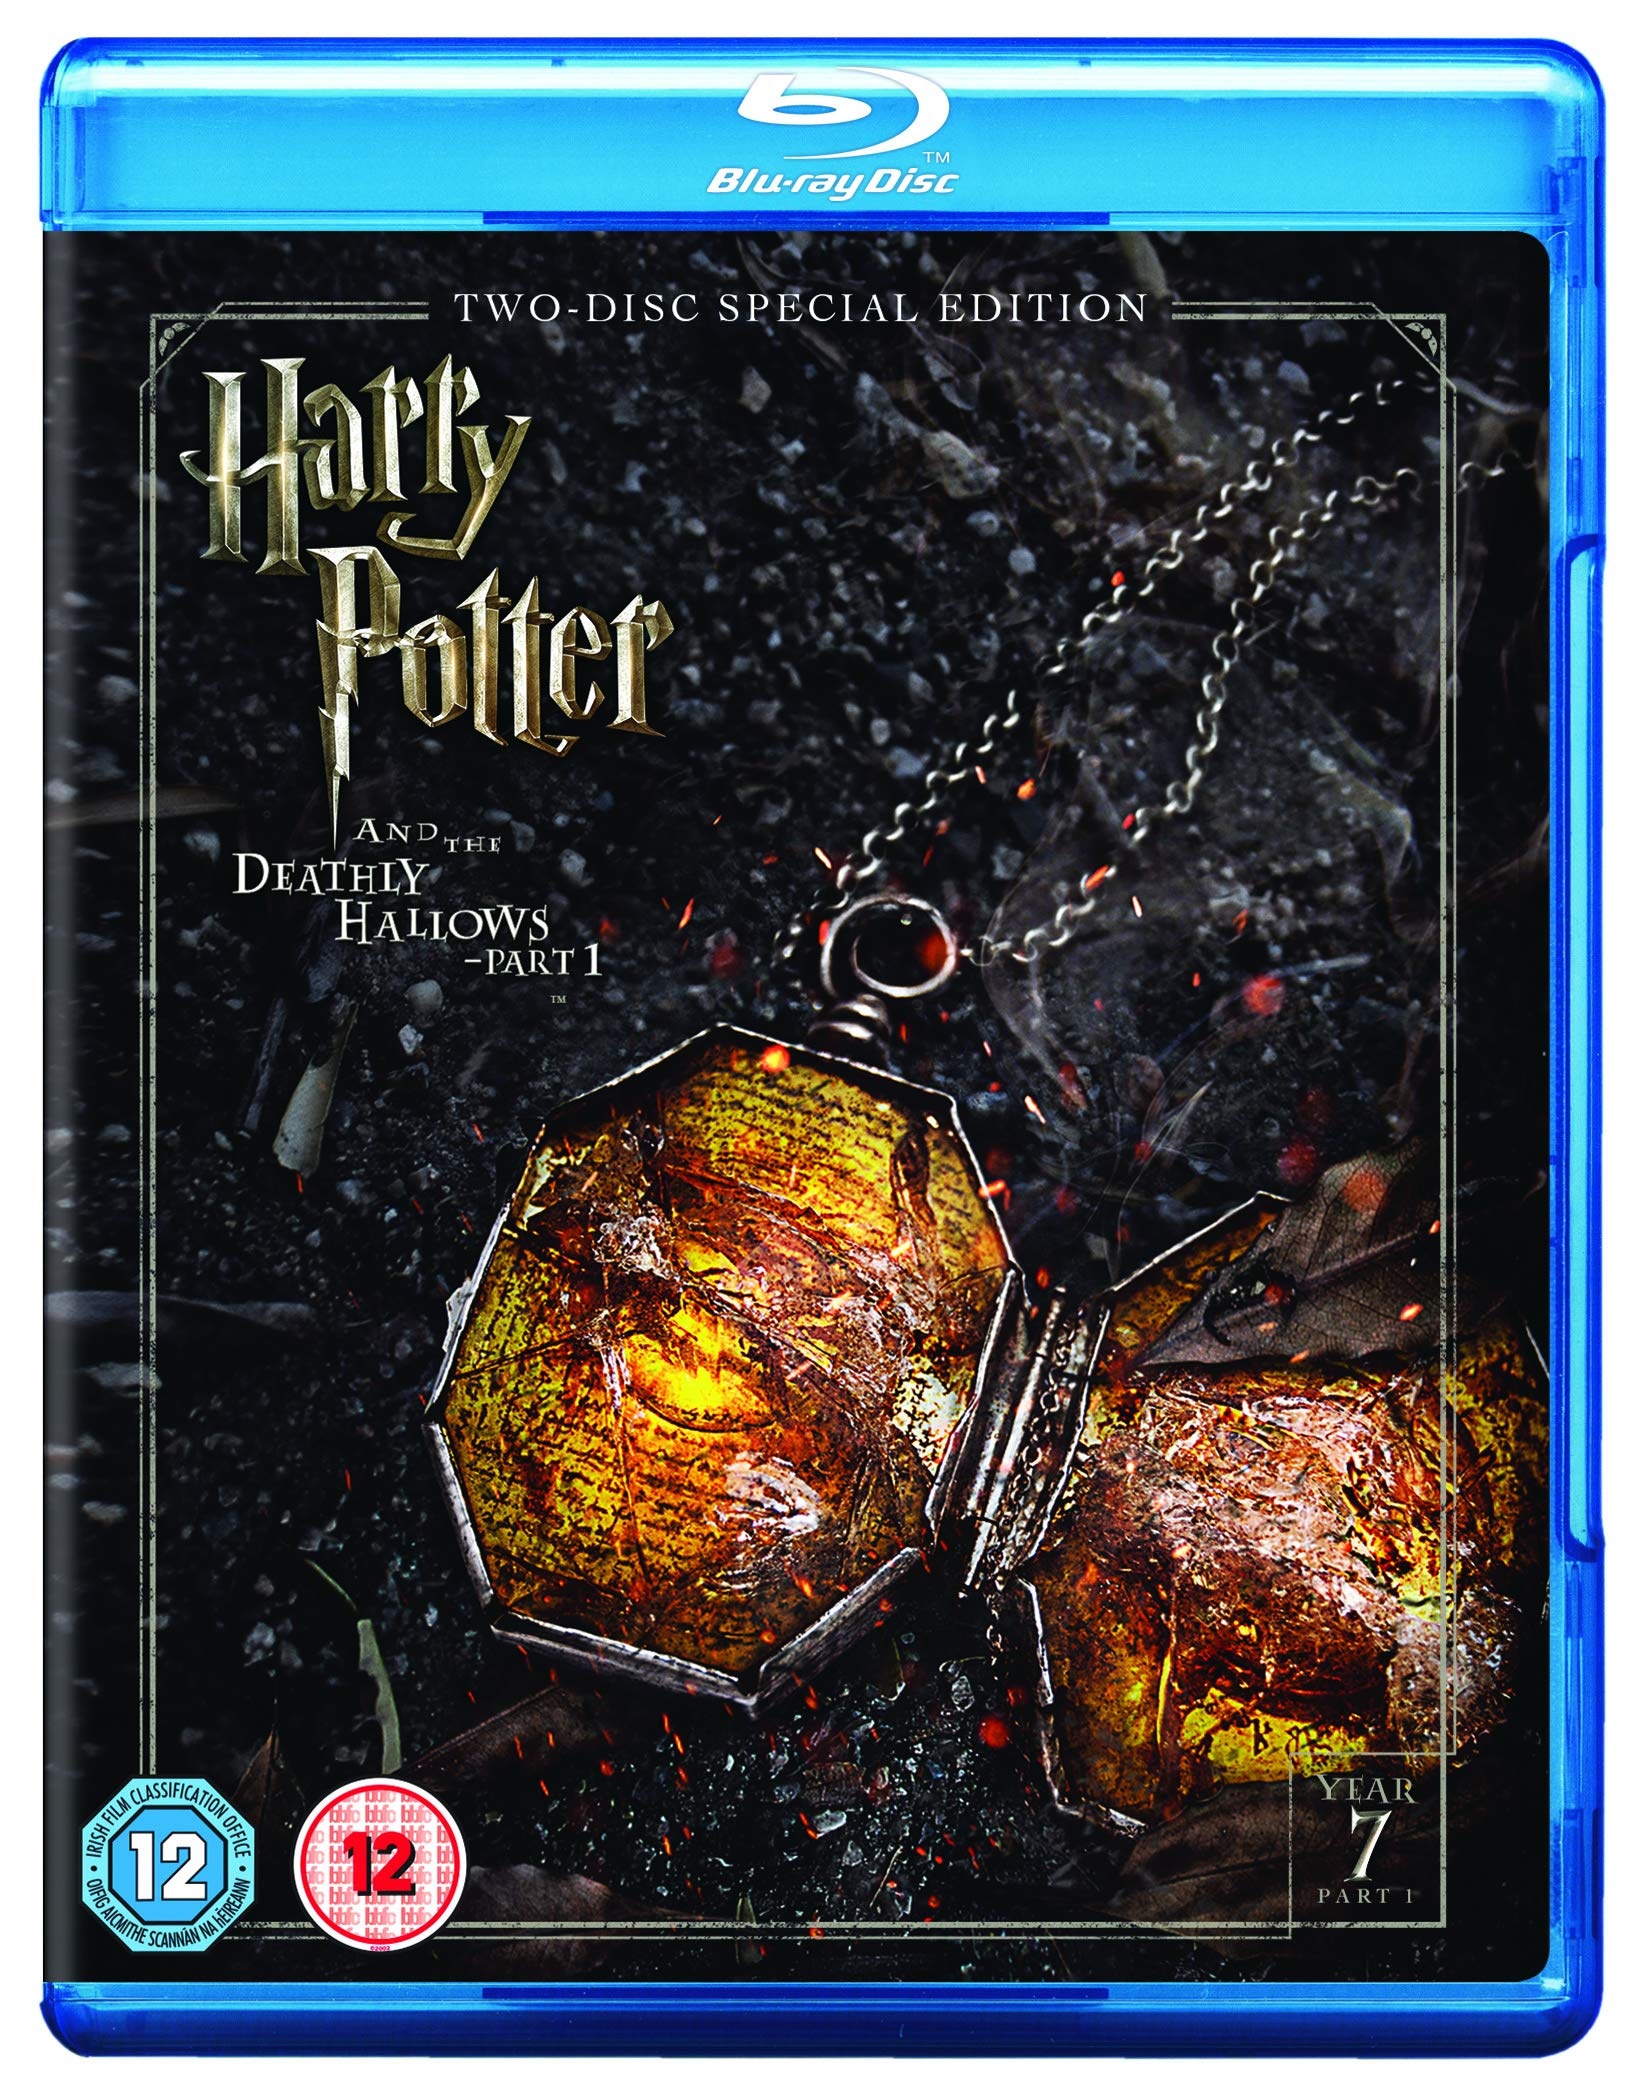 Harry Potter And The Deathly Hallows: Part 1 [Blu-ray] [UK Import]